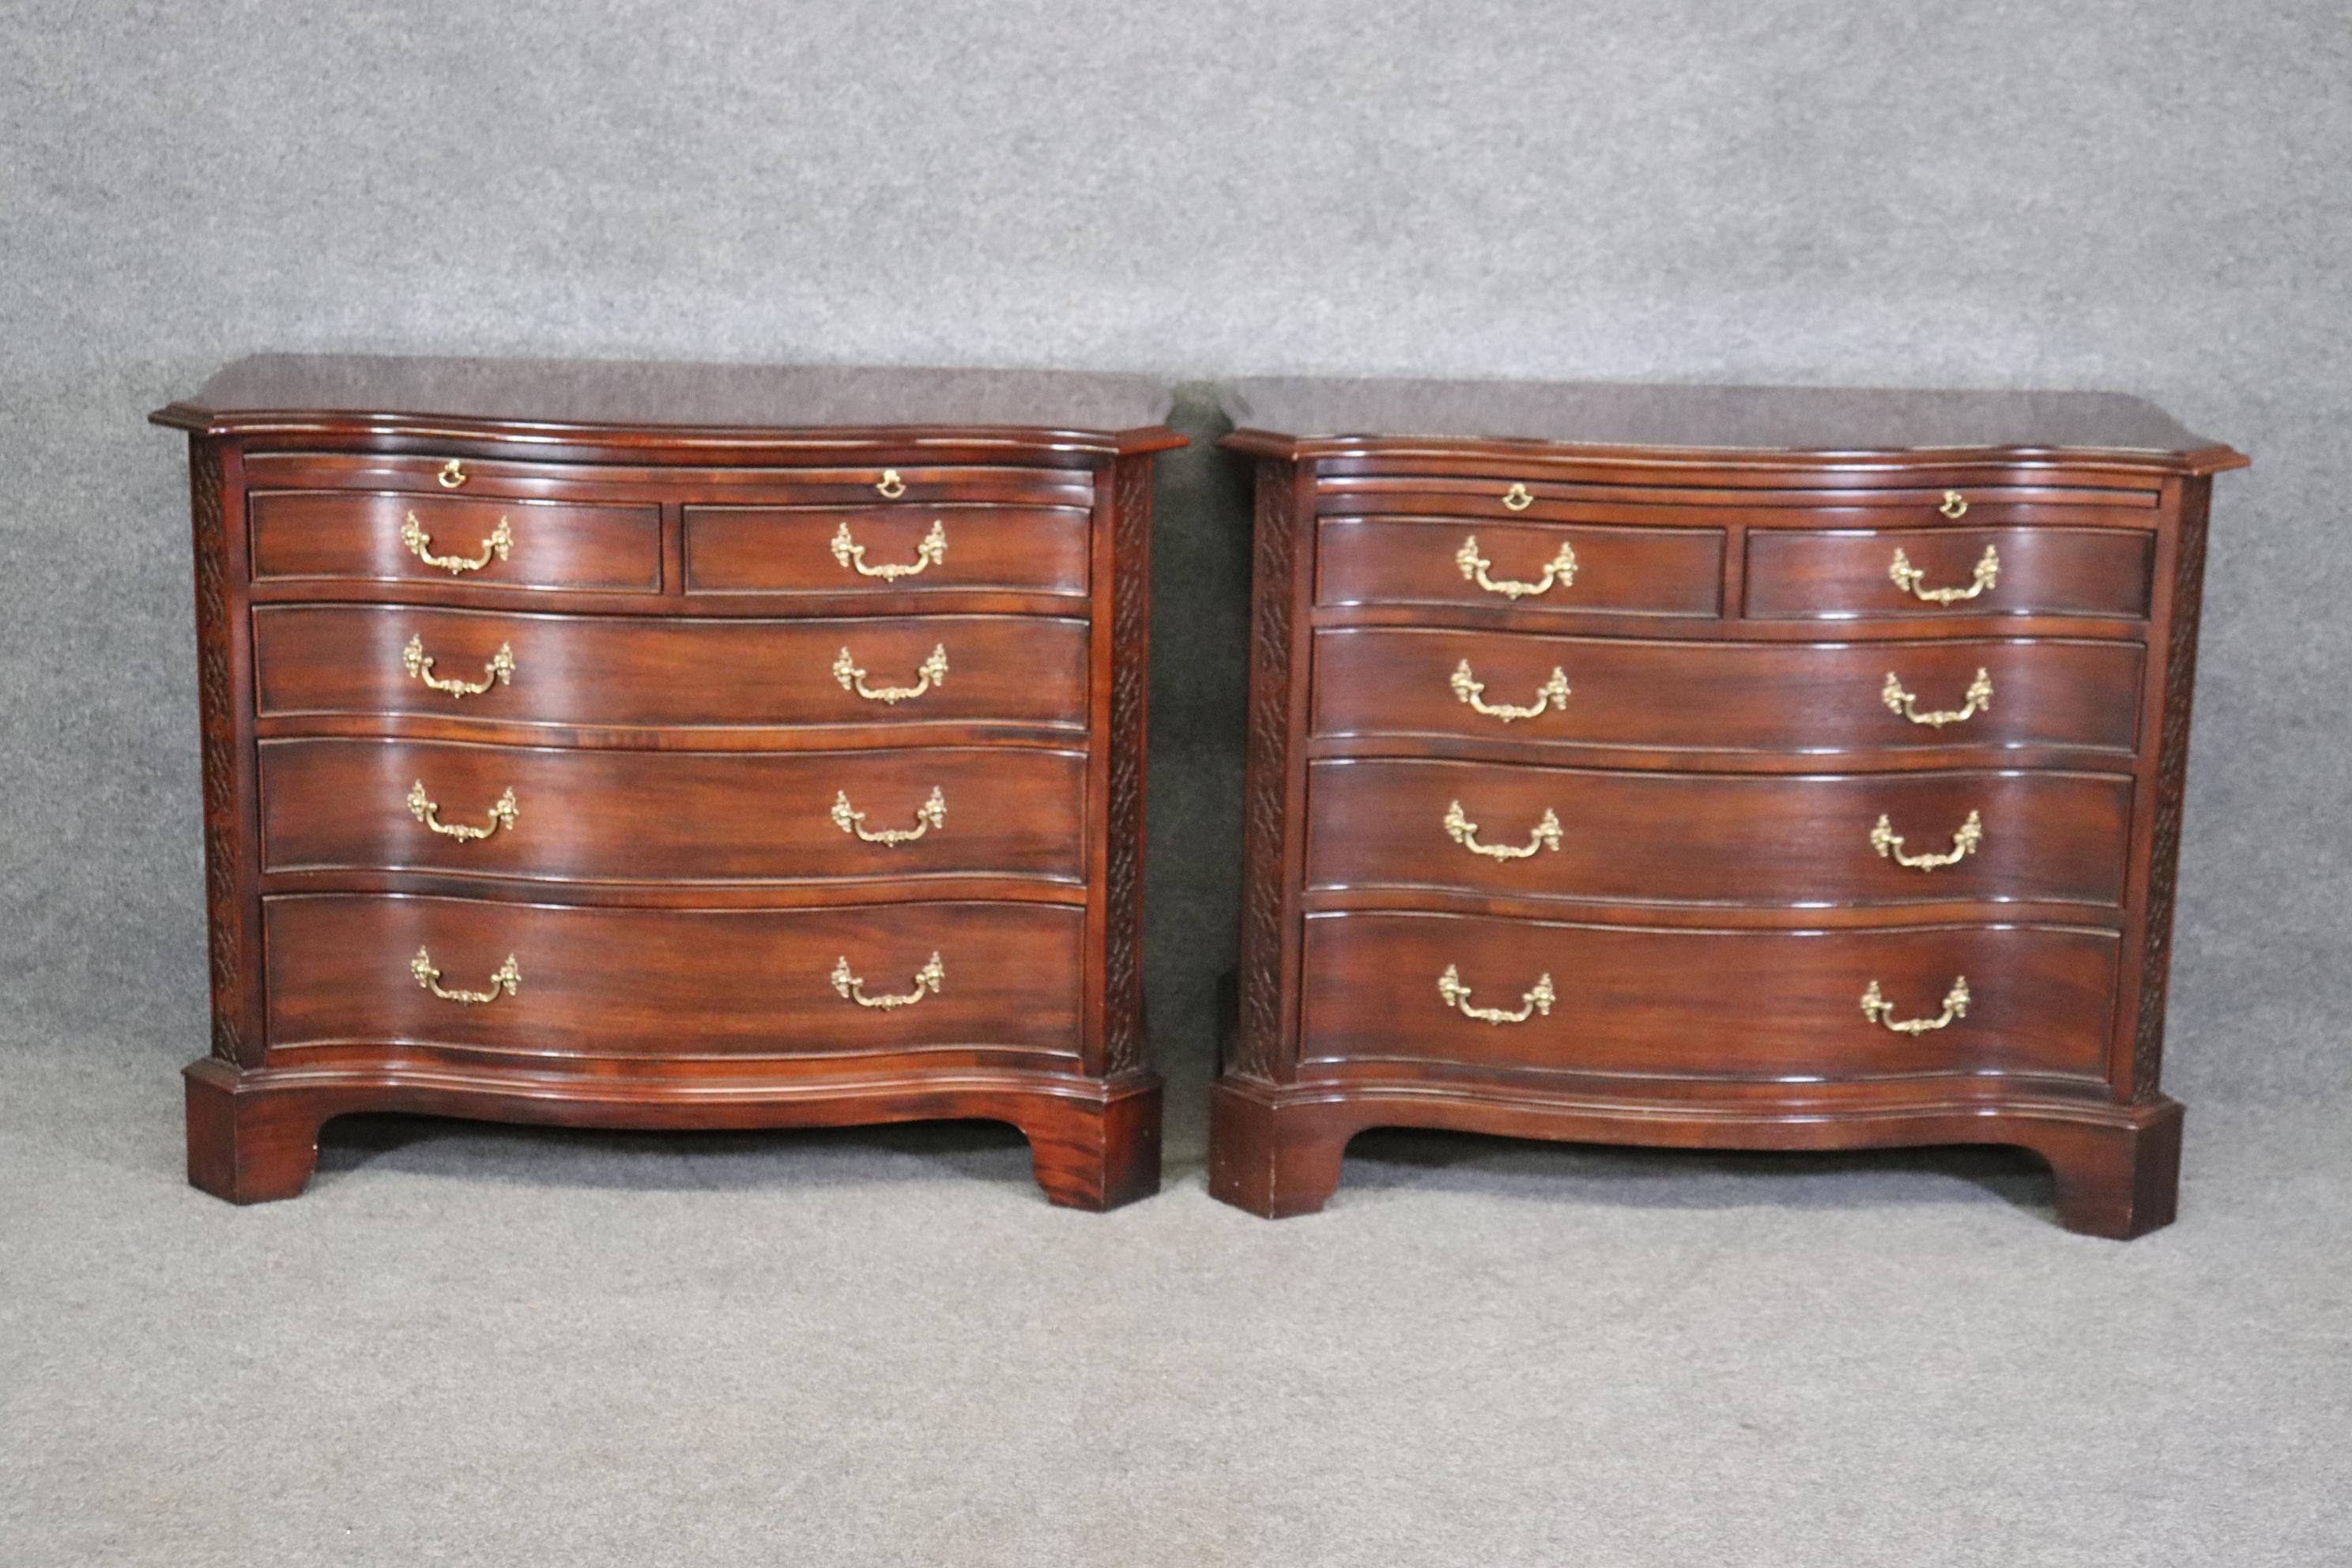 This is a beautiful pair of Century Furniture bachelors chests. The chests are designed in the Chippendale style and made of mahogany and oak secondaries. The chests are in good condition and one side of one cabinet from teh sun but otherwise they